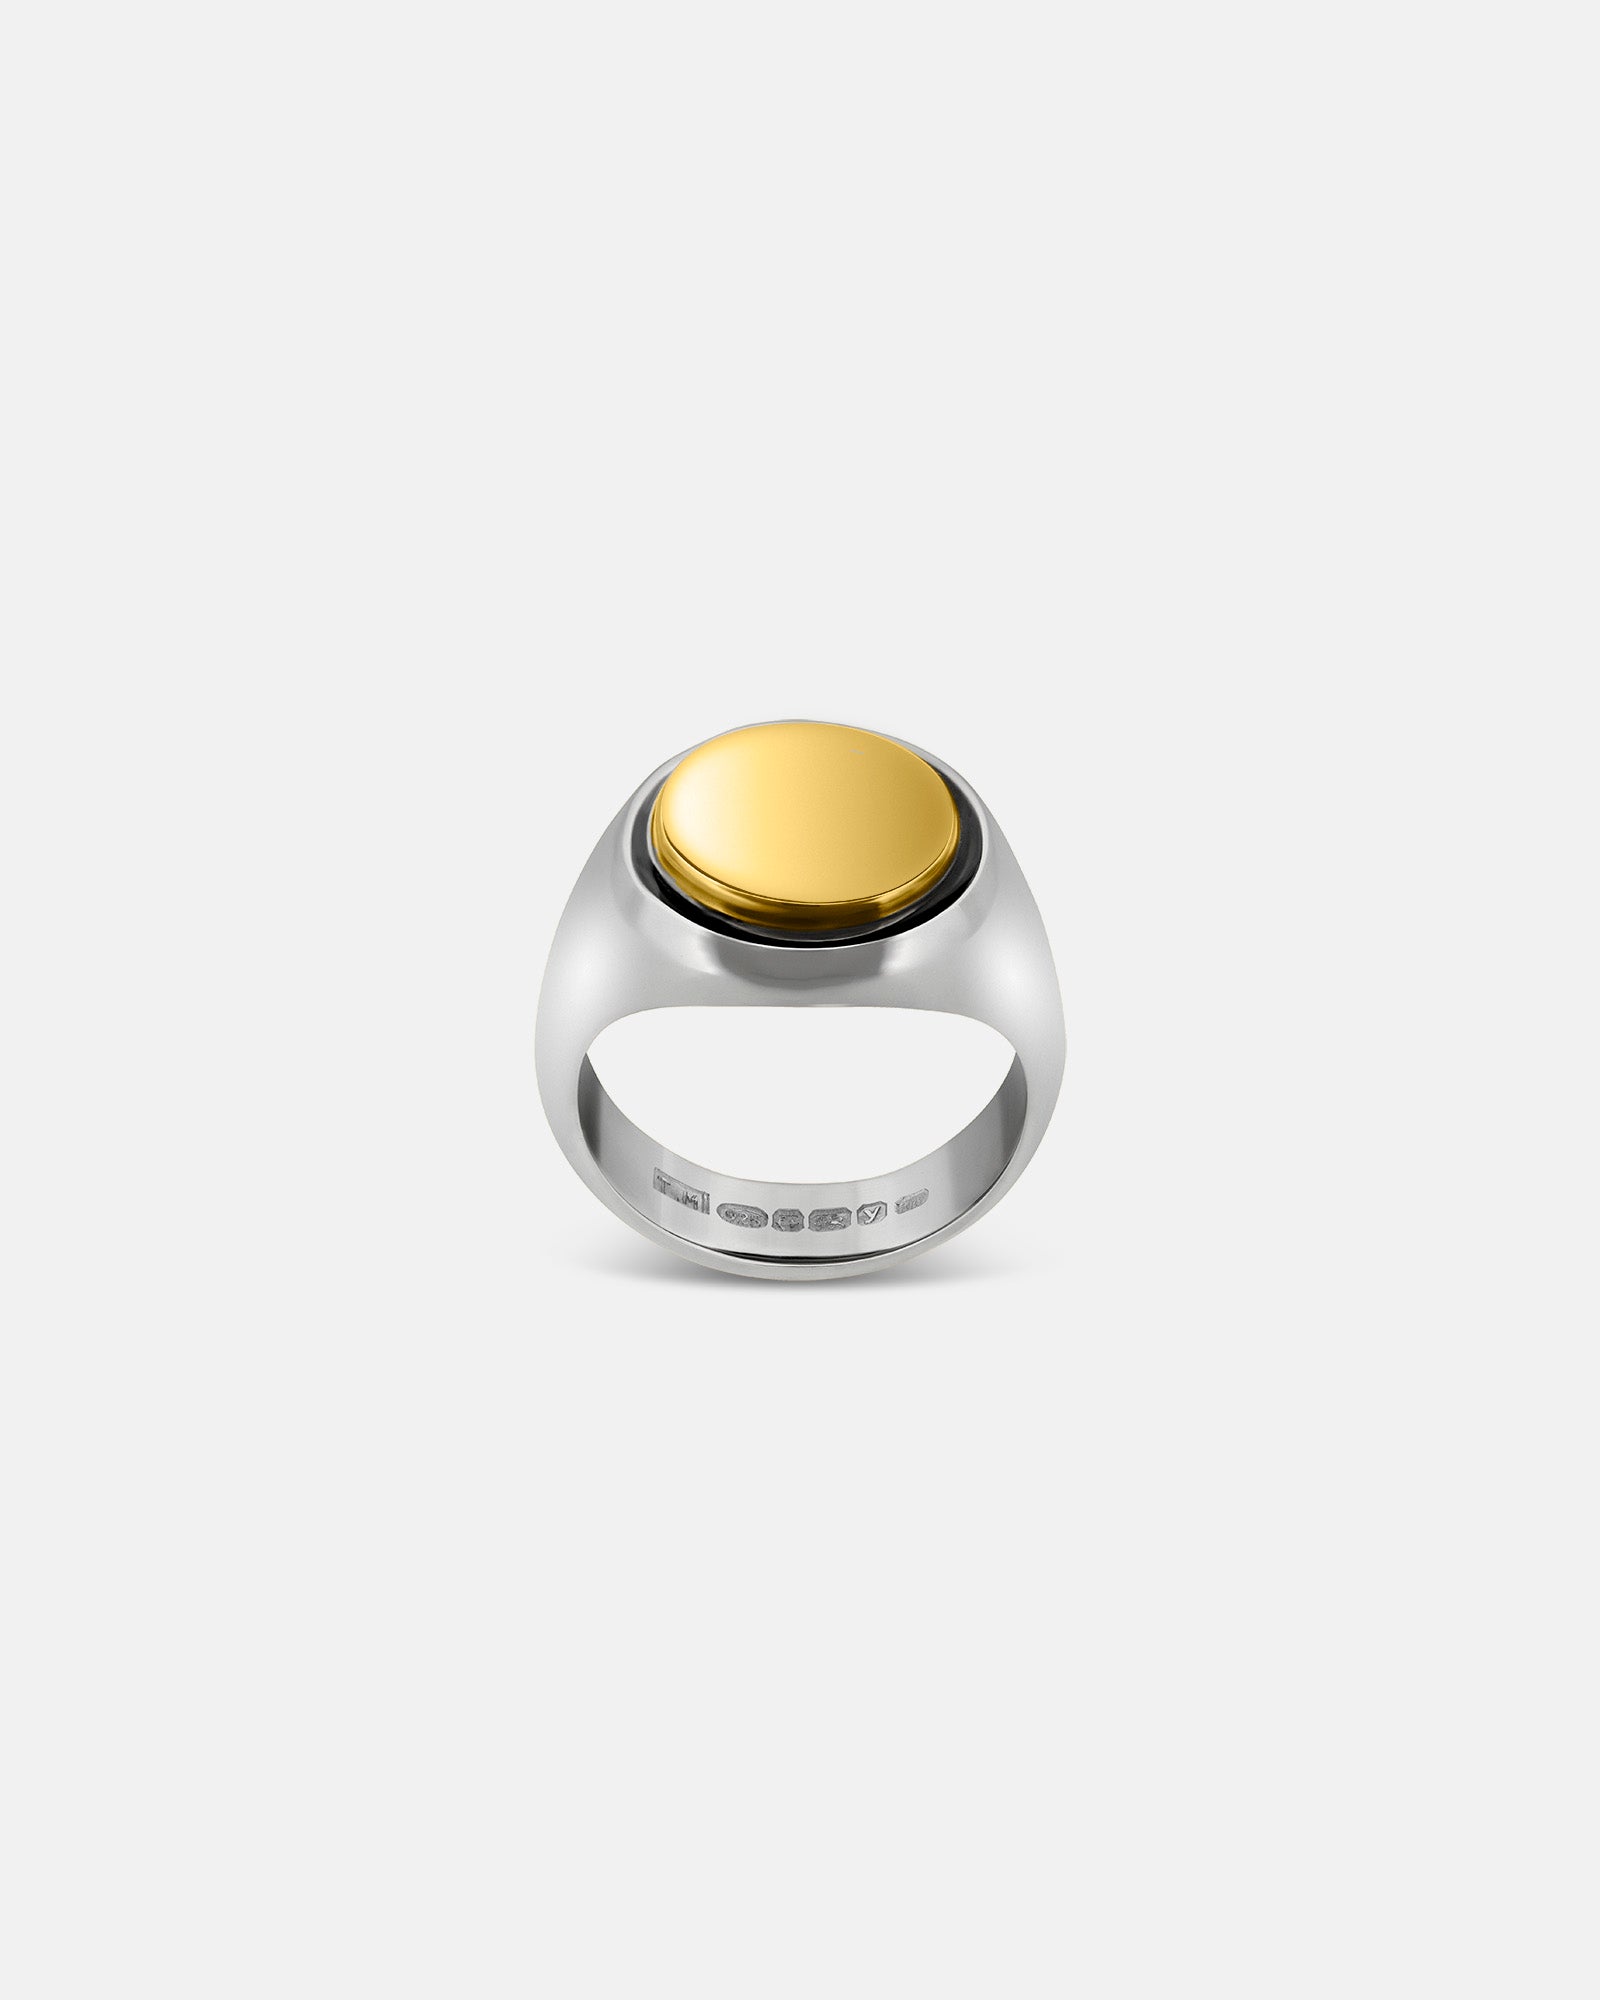 Small Round Signet Ring in Sterling Silver / 9k Yellow Gold by Wilson Grant